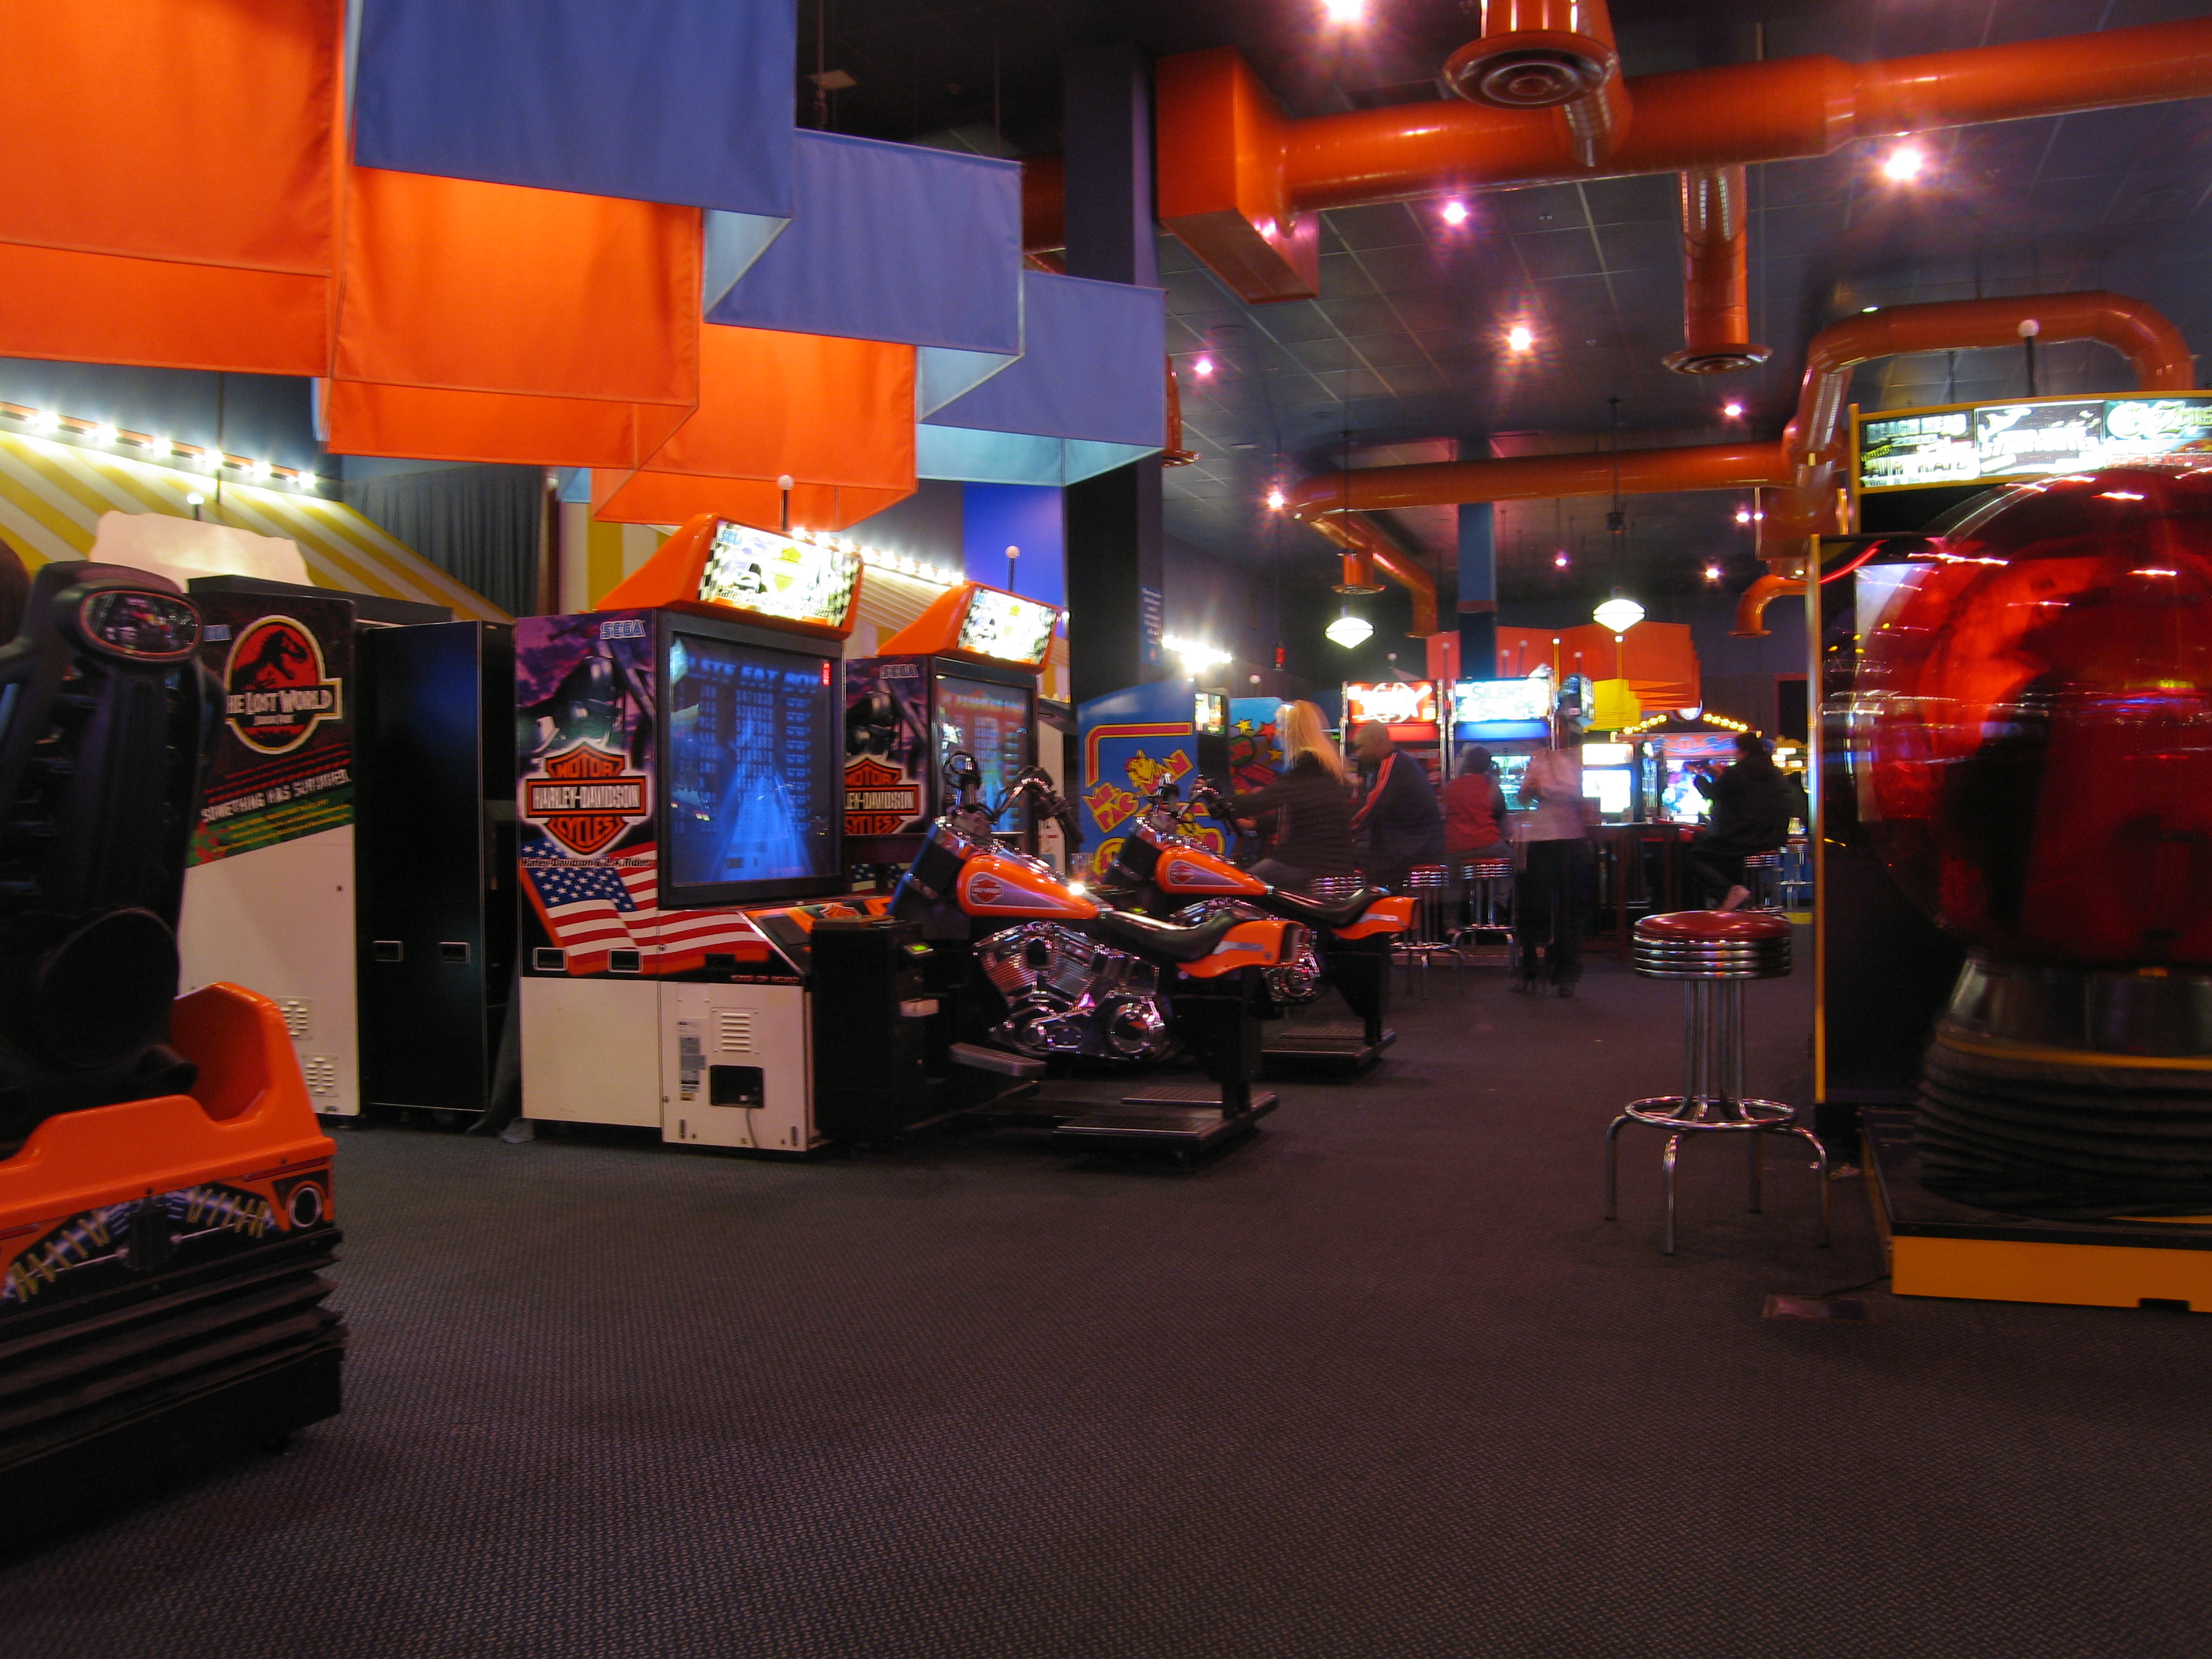 dave & buster